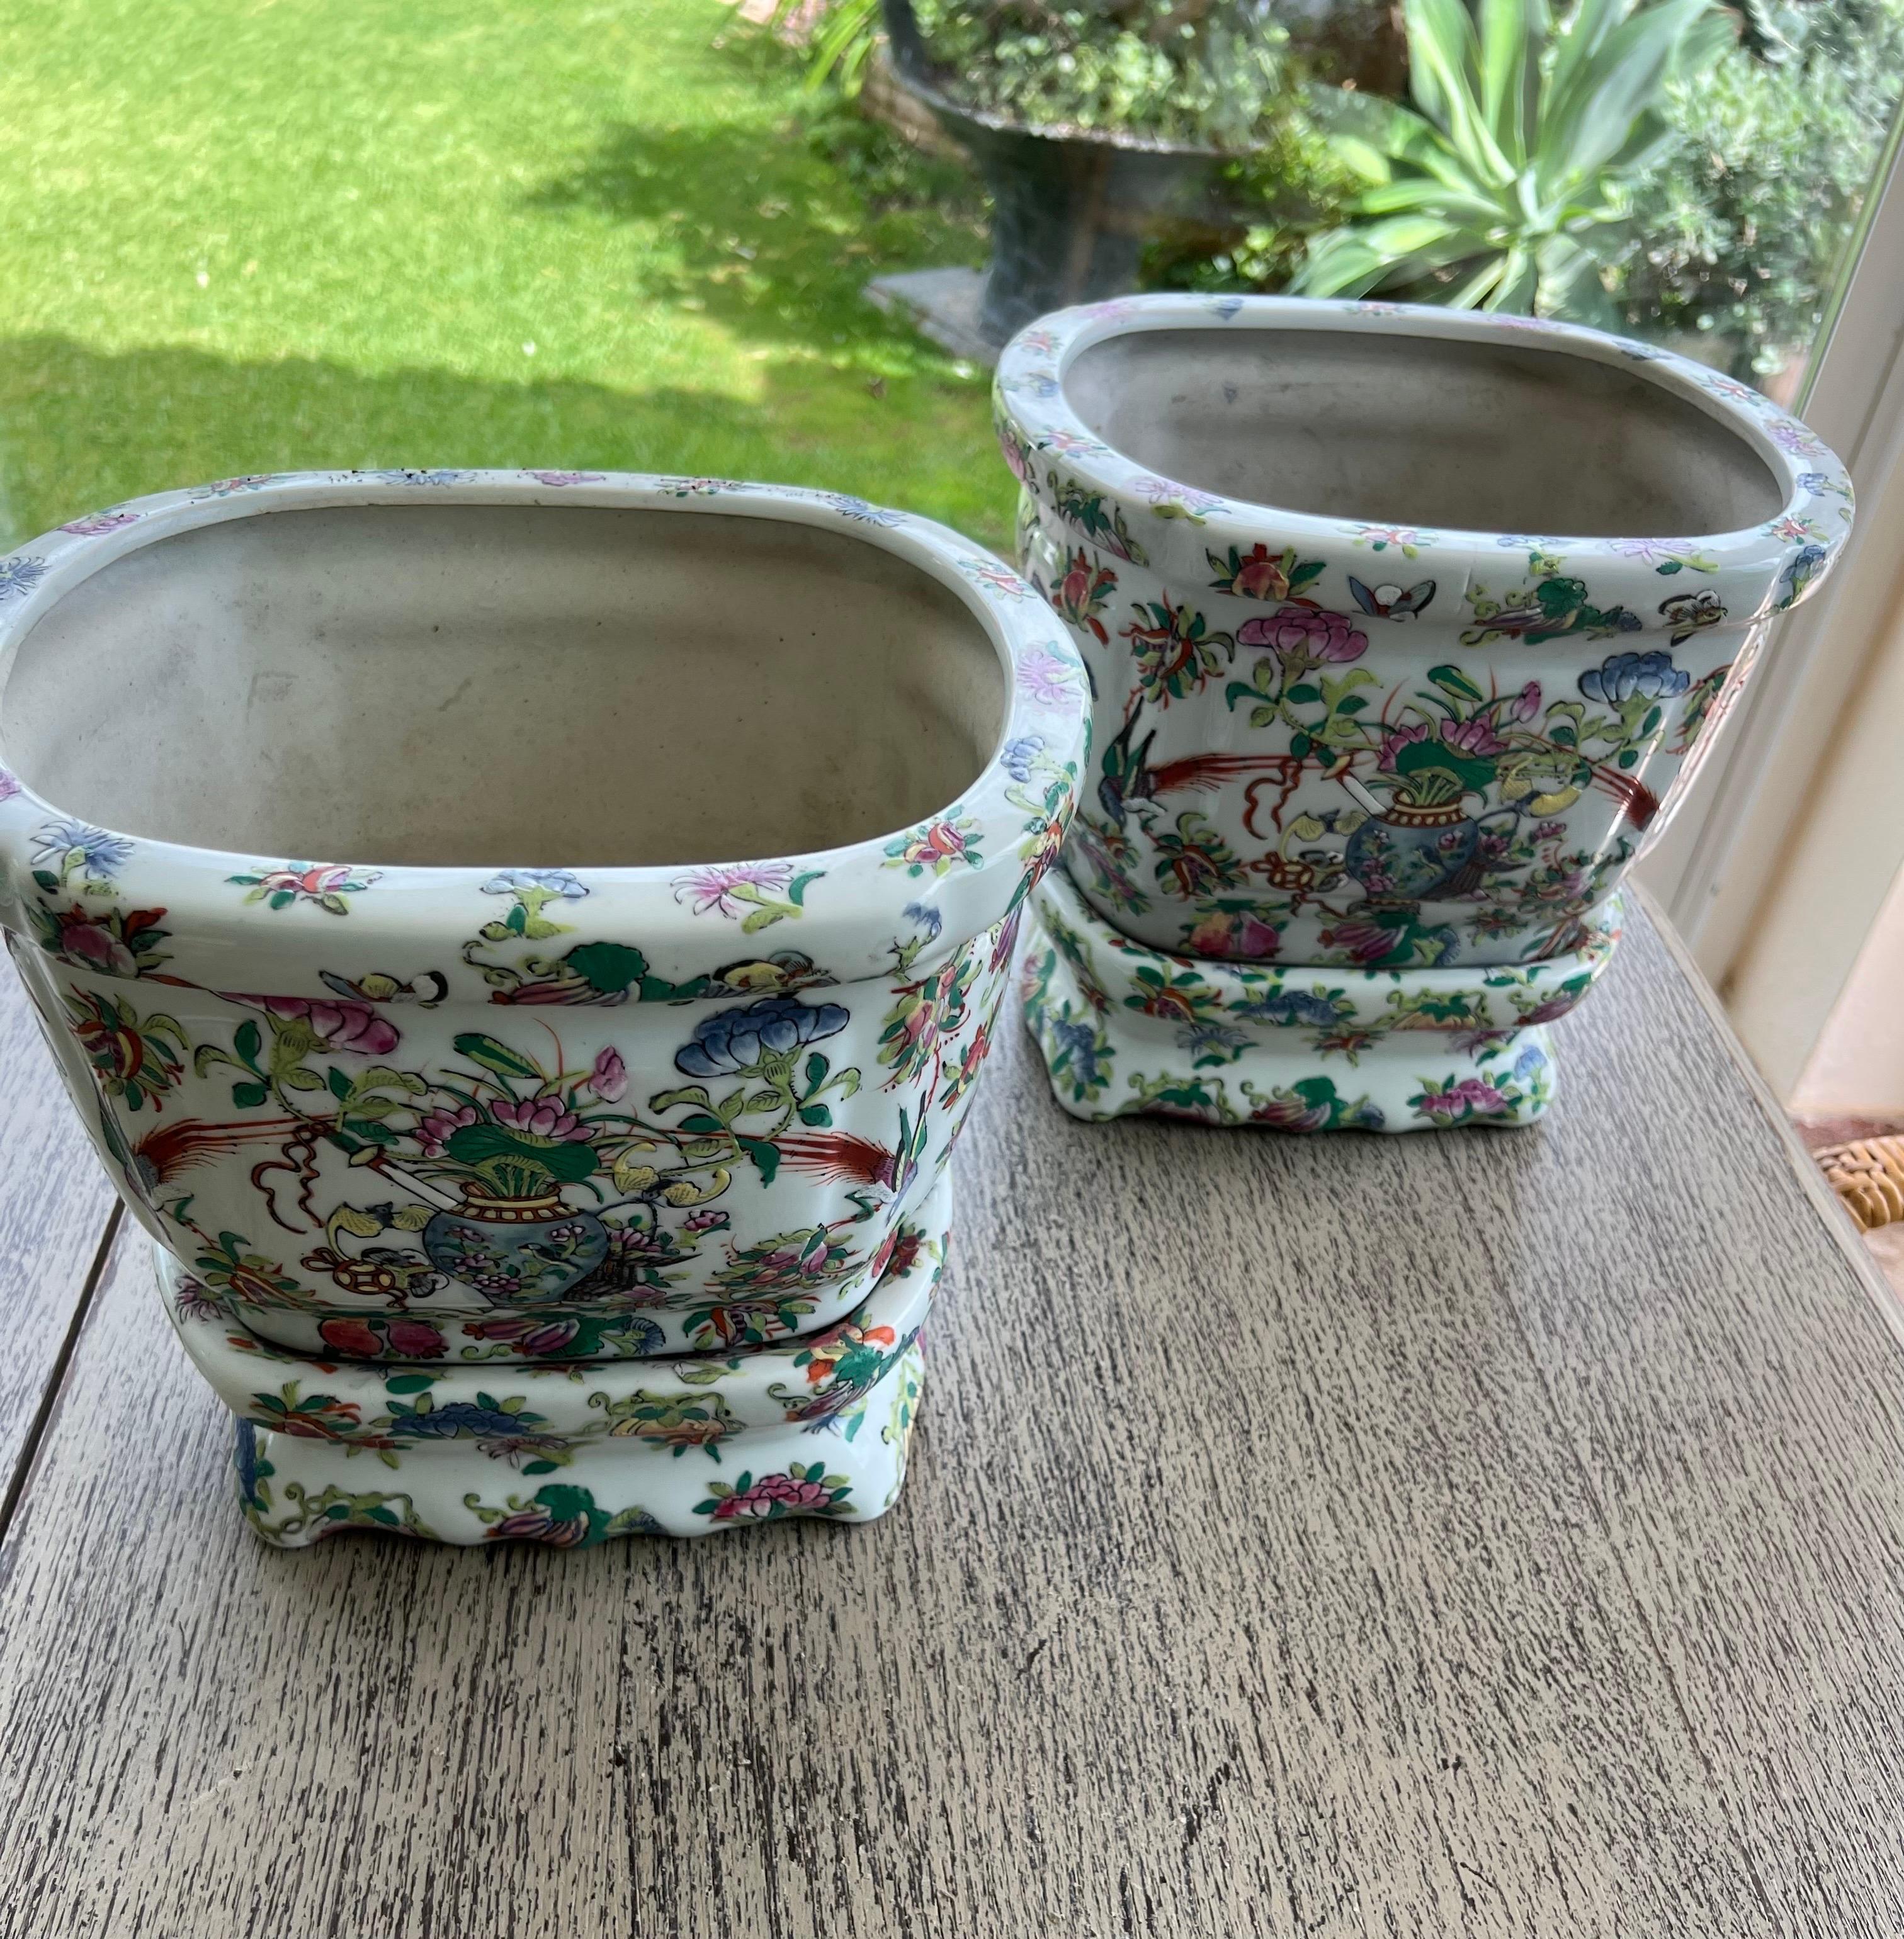 Chinese ceramic planters early XX century with bases.
Beautiful pieces for central decor planters for living room or main receptions.
Measure base 21x17x8
Planters 21x17x26

PRADERA is a second generation of a family run business jewelers of